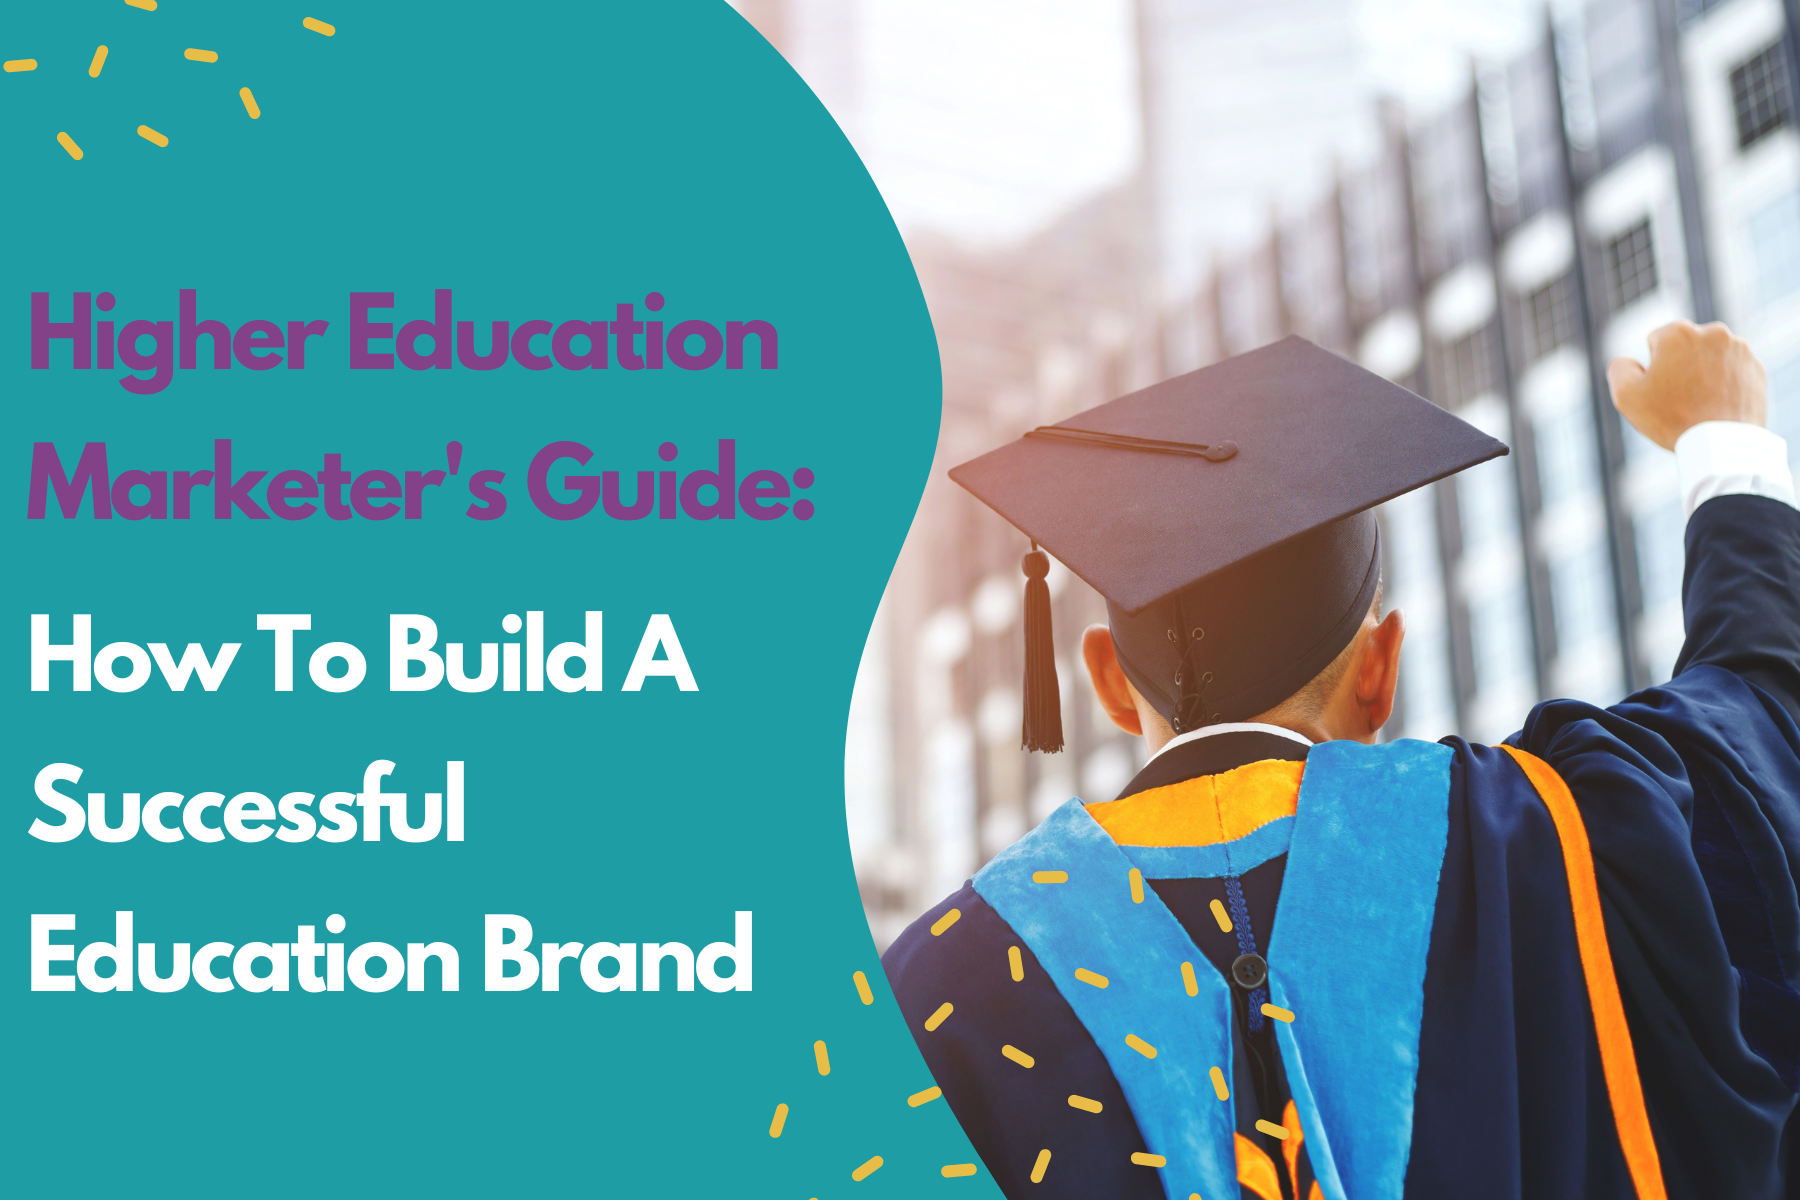 Blog - Higher Education Marketer's Guide: How To Build A Successful Education Brand. University student in graduation robe